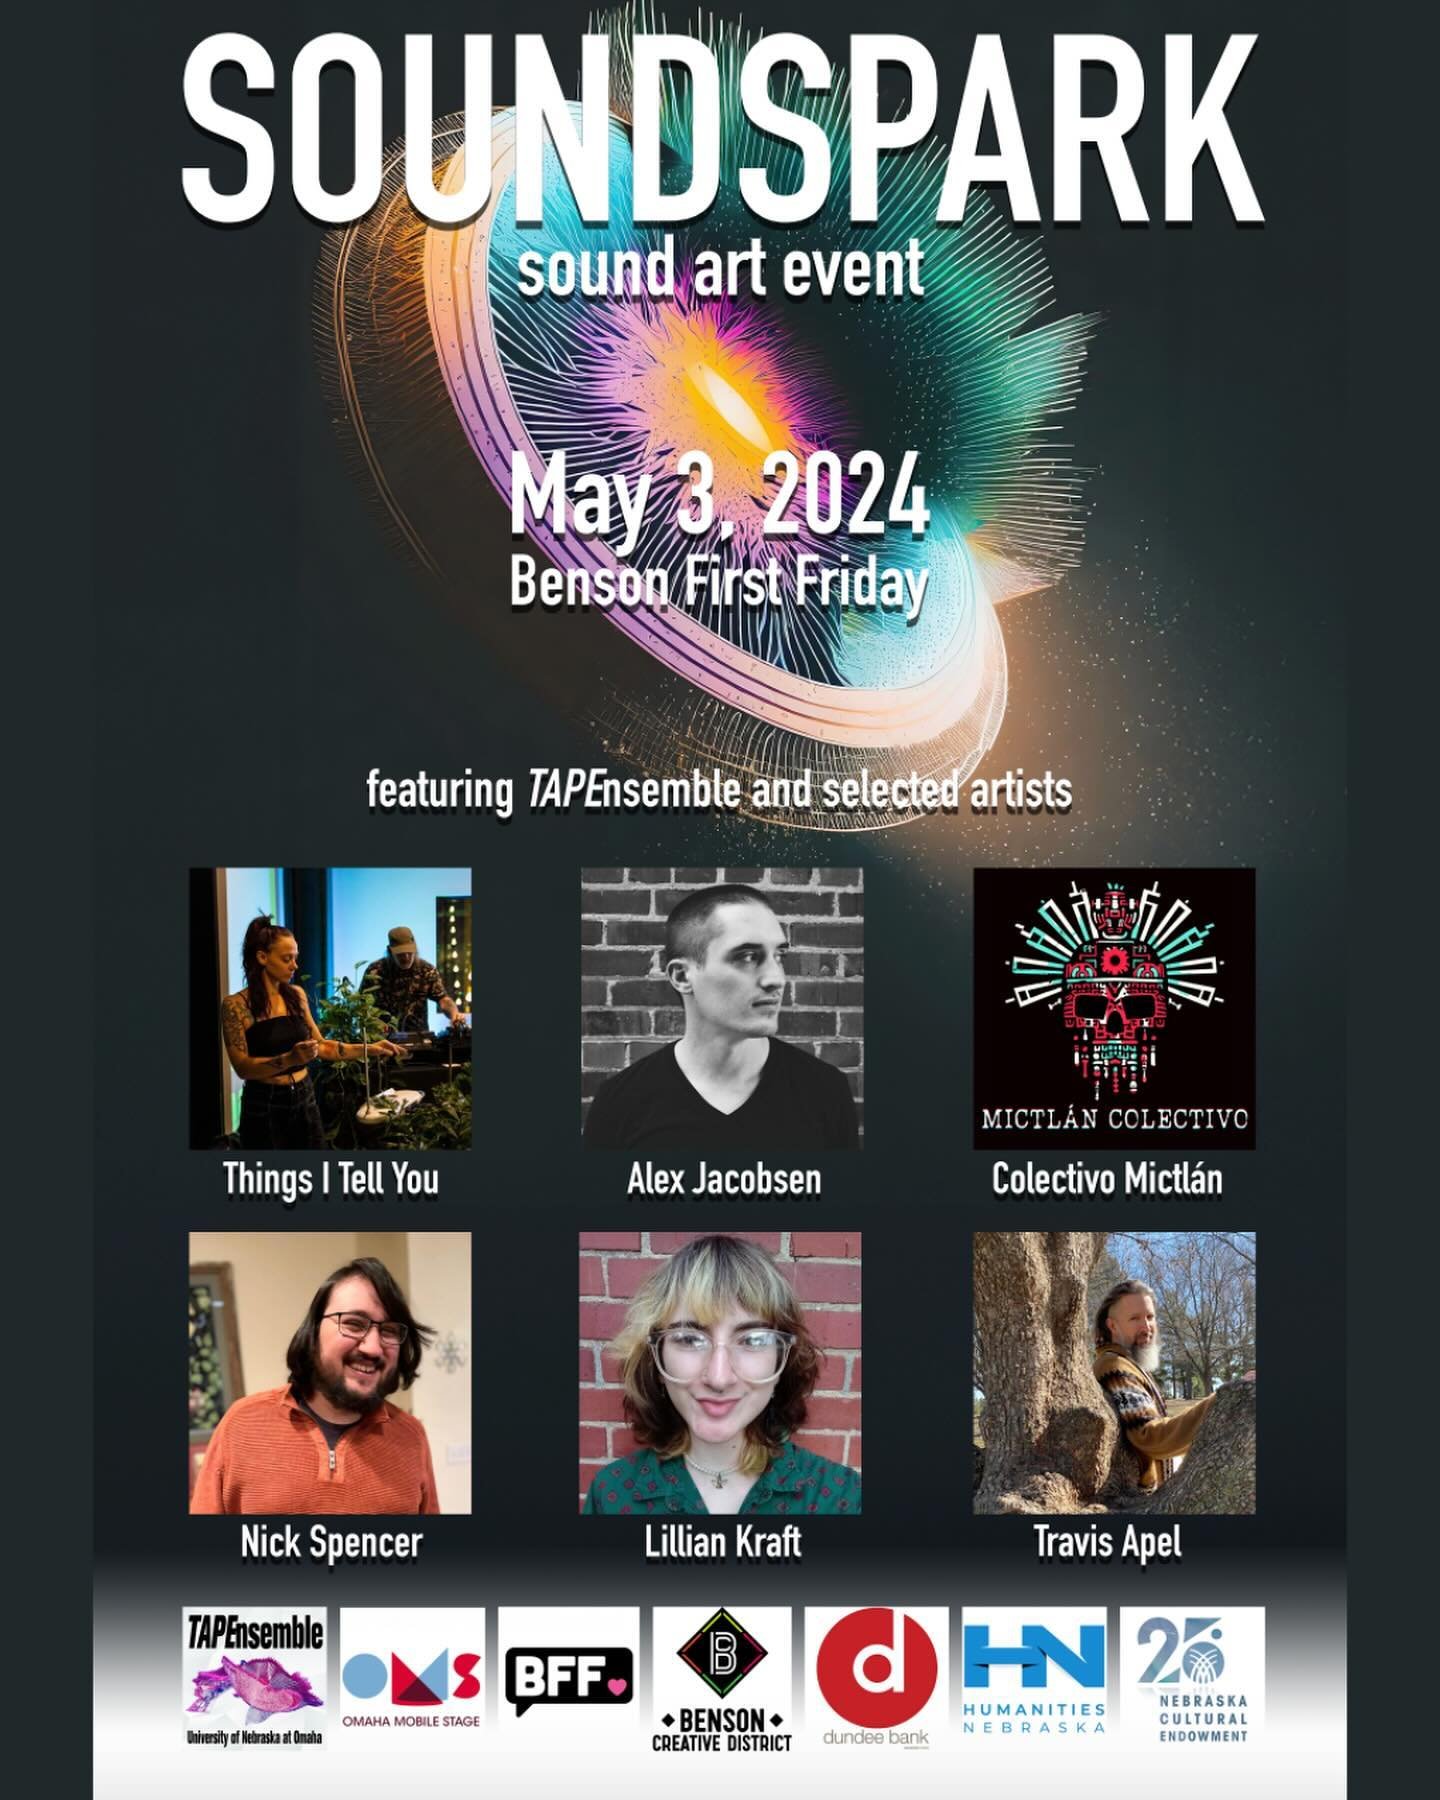 Join us at SOUNDSPARK, a new sound art event in Omaha taking place during Benson First Friday on May 3, 2024 from 6-10pm. 

Featured Artists: @travisapel @xelajacobsen  @colectivomictlan @spencer.soundworks Lillian Kraft, and Things I Tell You. 

Dr.